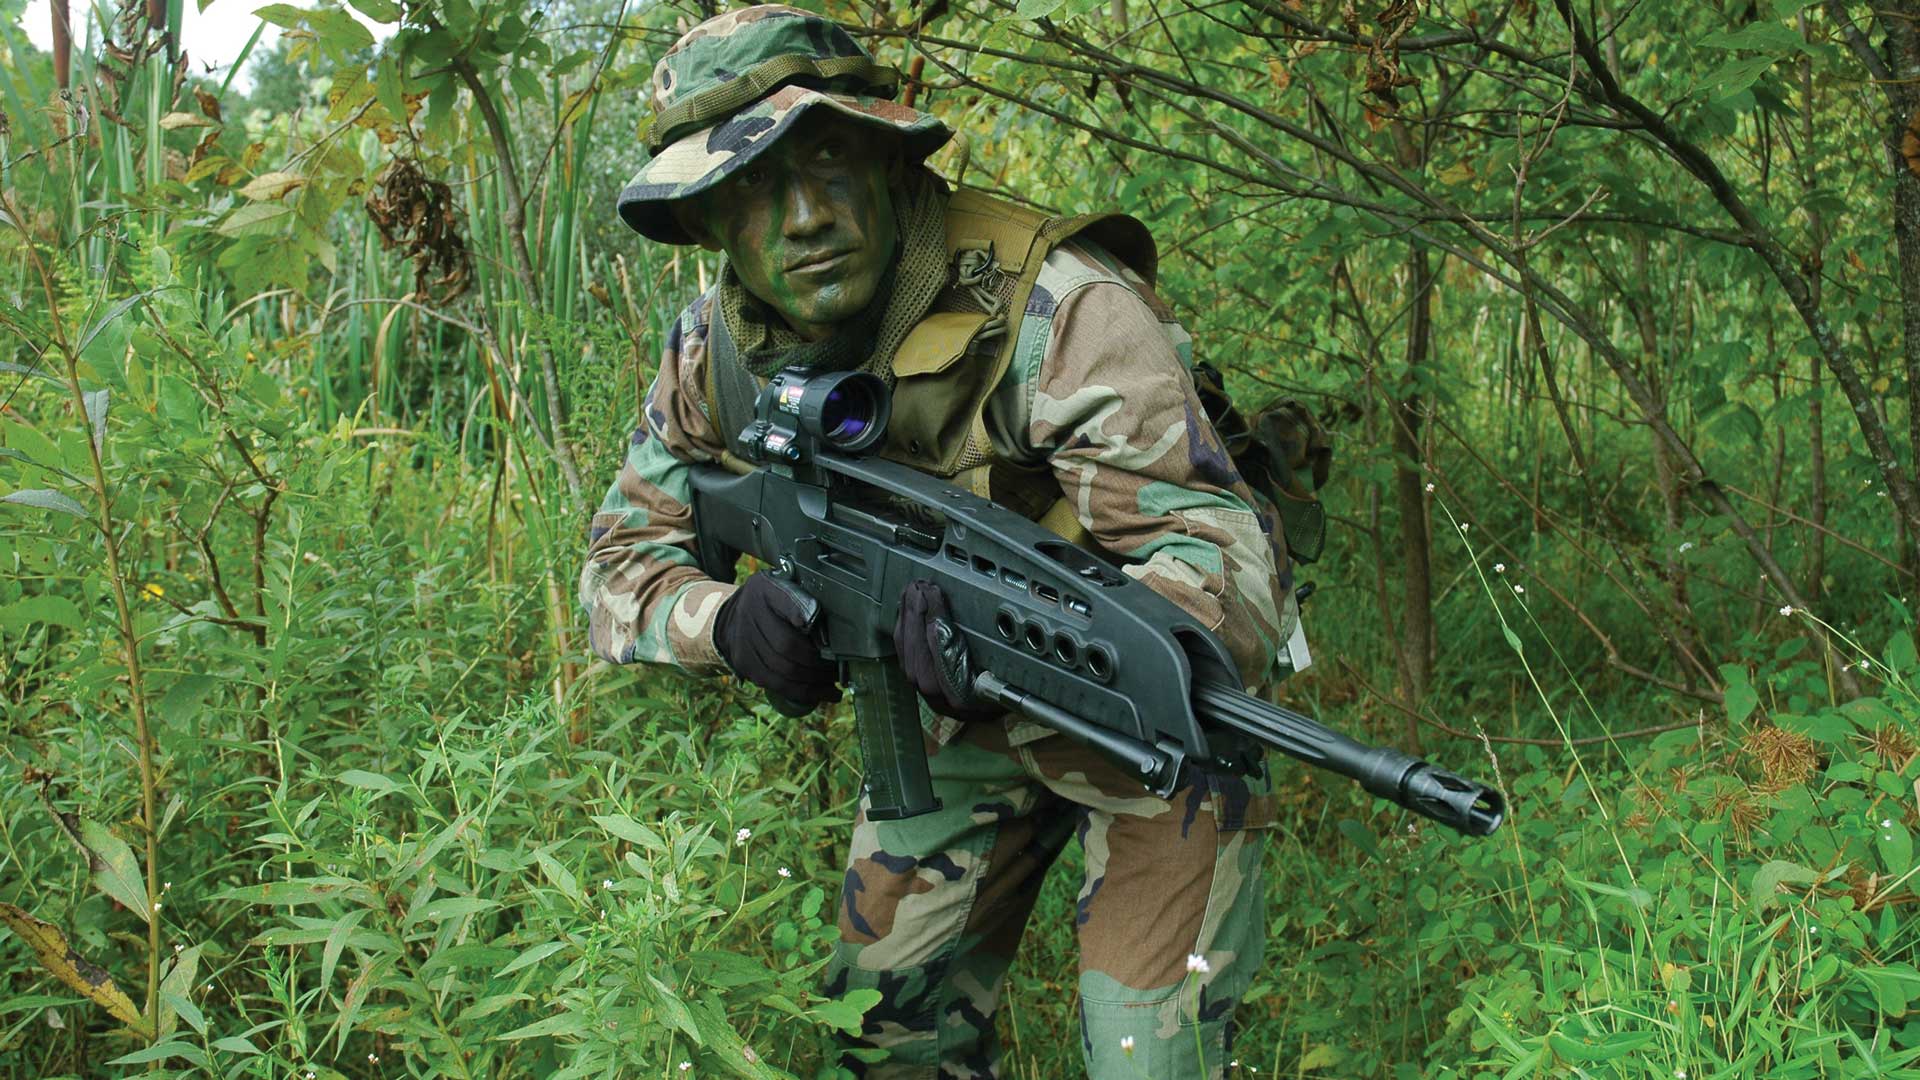 outdoors xm8 soldier green jungle camouflage rifle gun